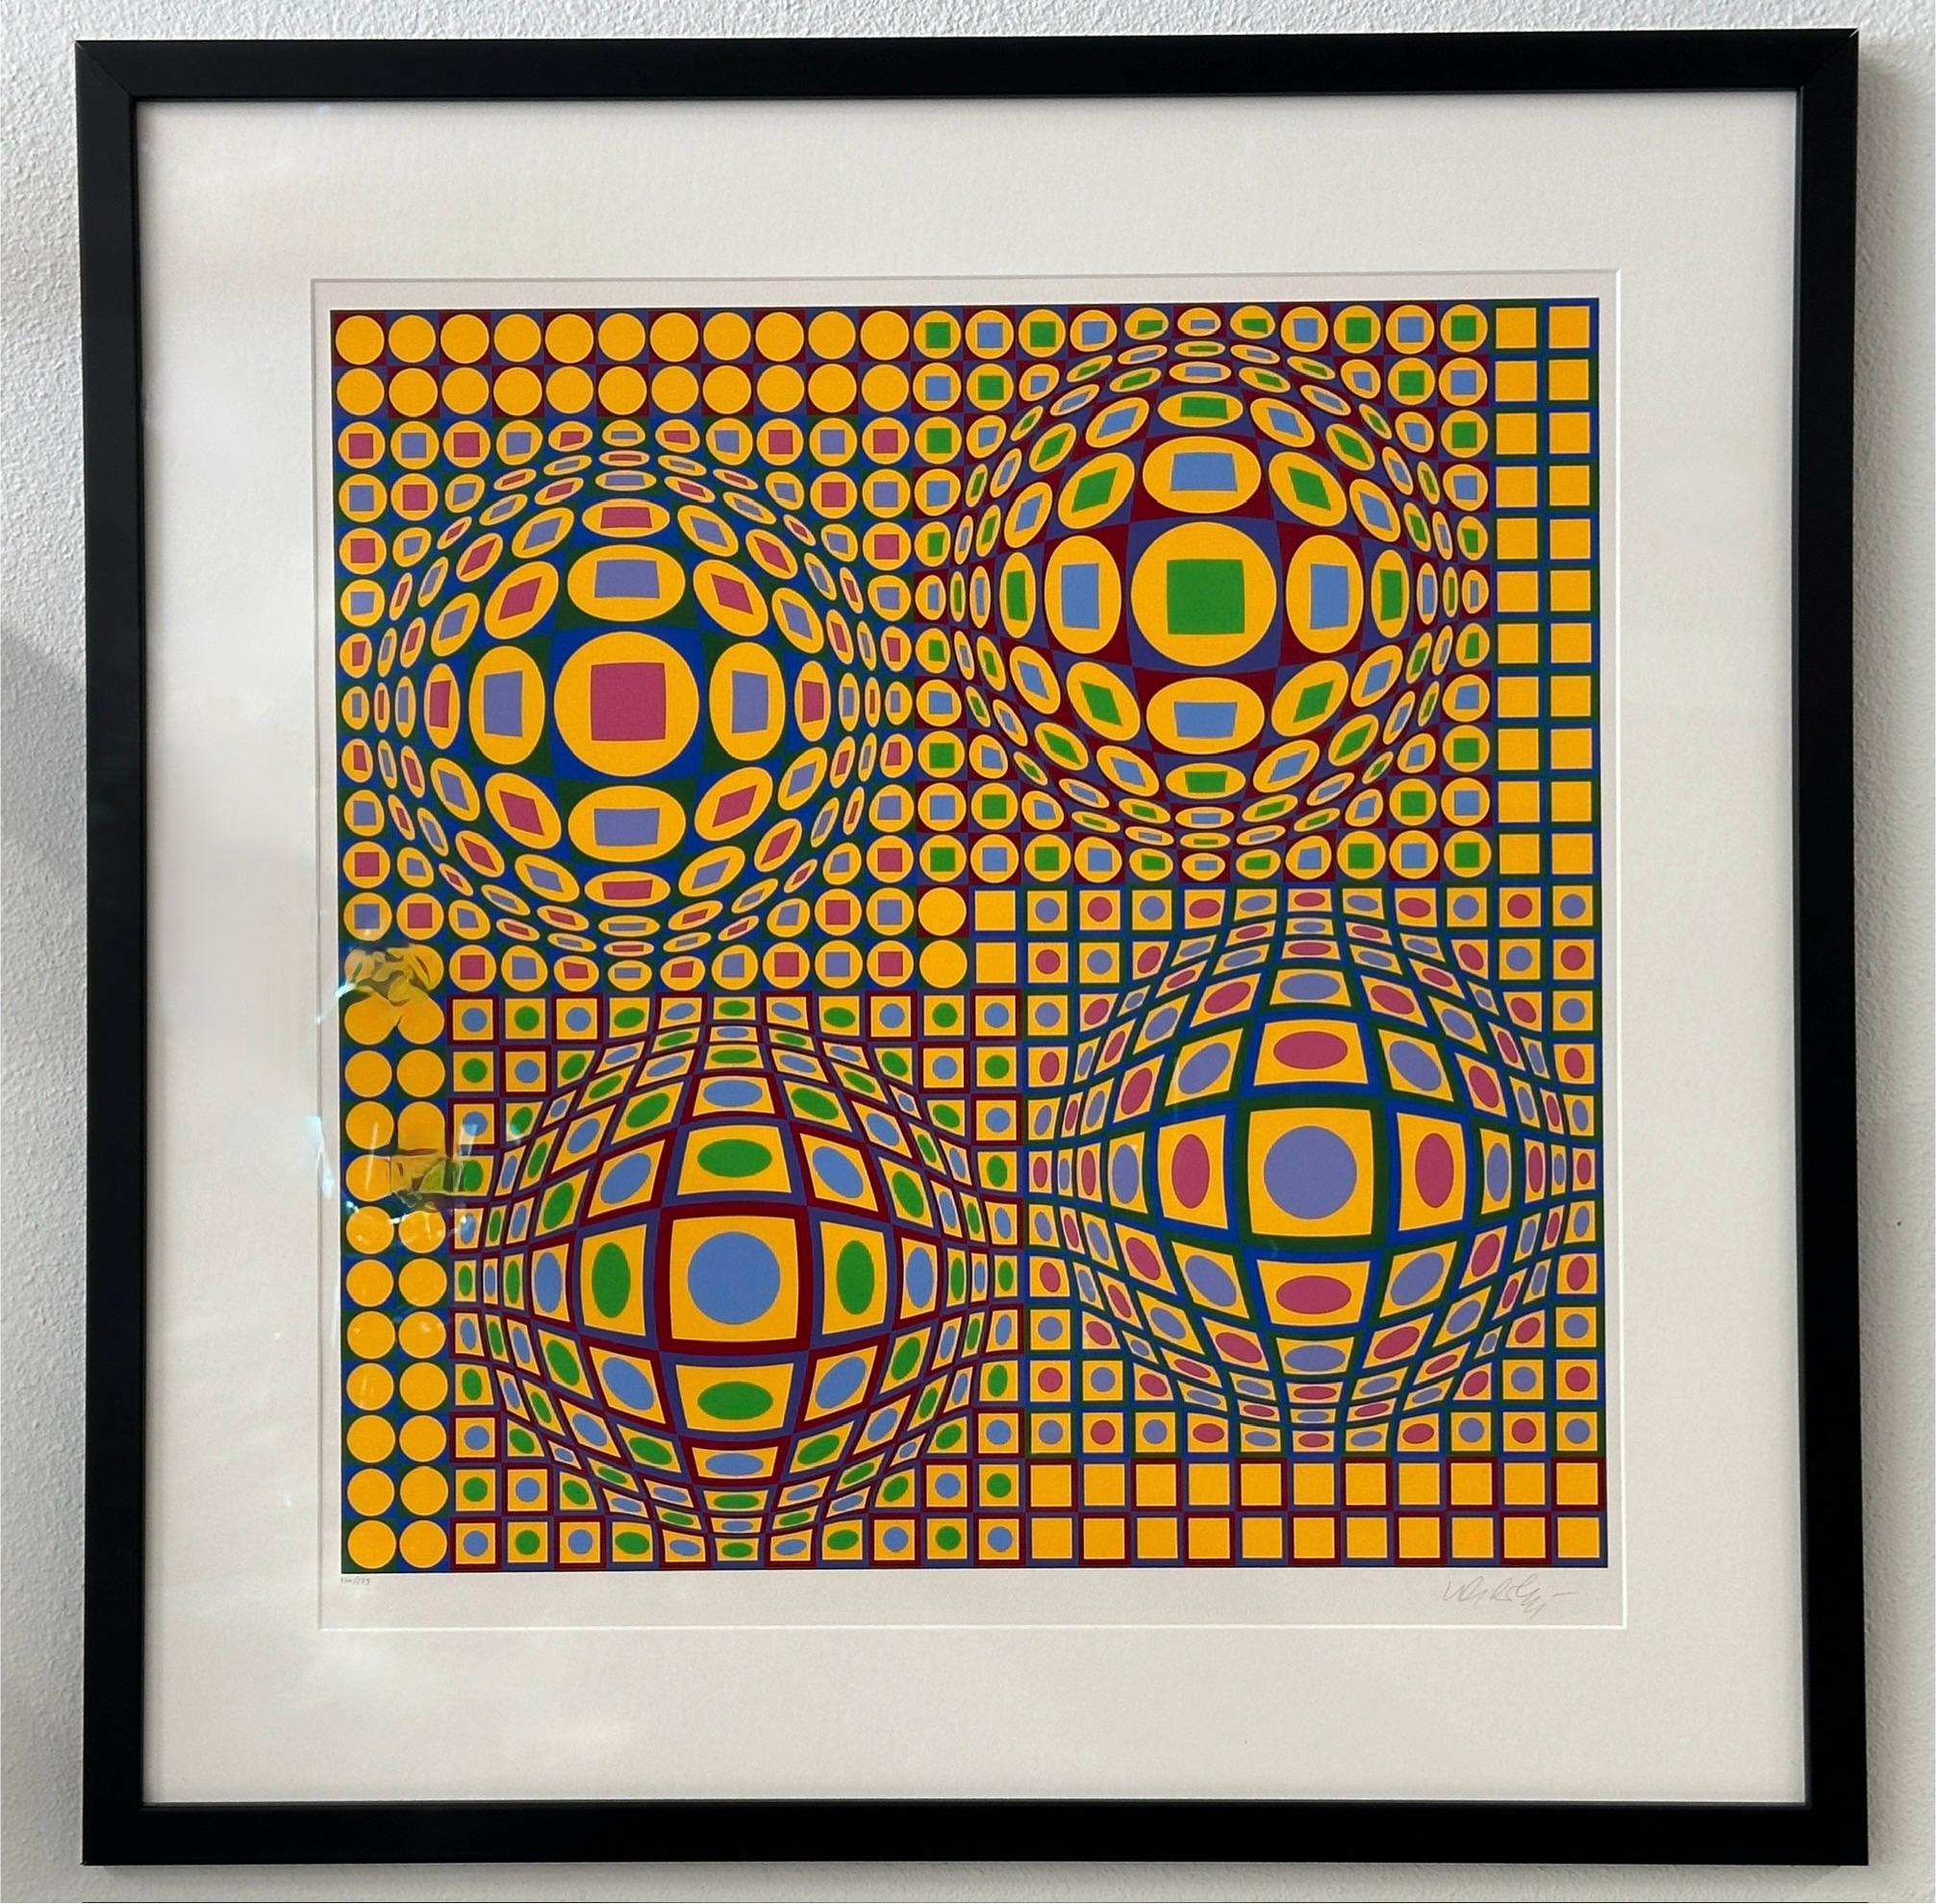 A wonderful vibrant screenprint by the pop art master Victor Vasarely. This one is from 1979 and titled “Quadrature” It is numbered  103/275 lower left and signed lower right. The matte opening is 25.5 inches square.  Frame dimensions are 34.5